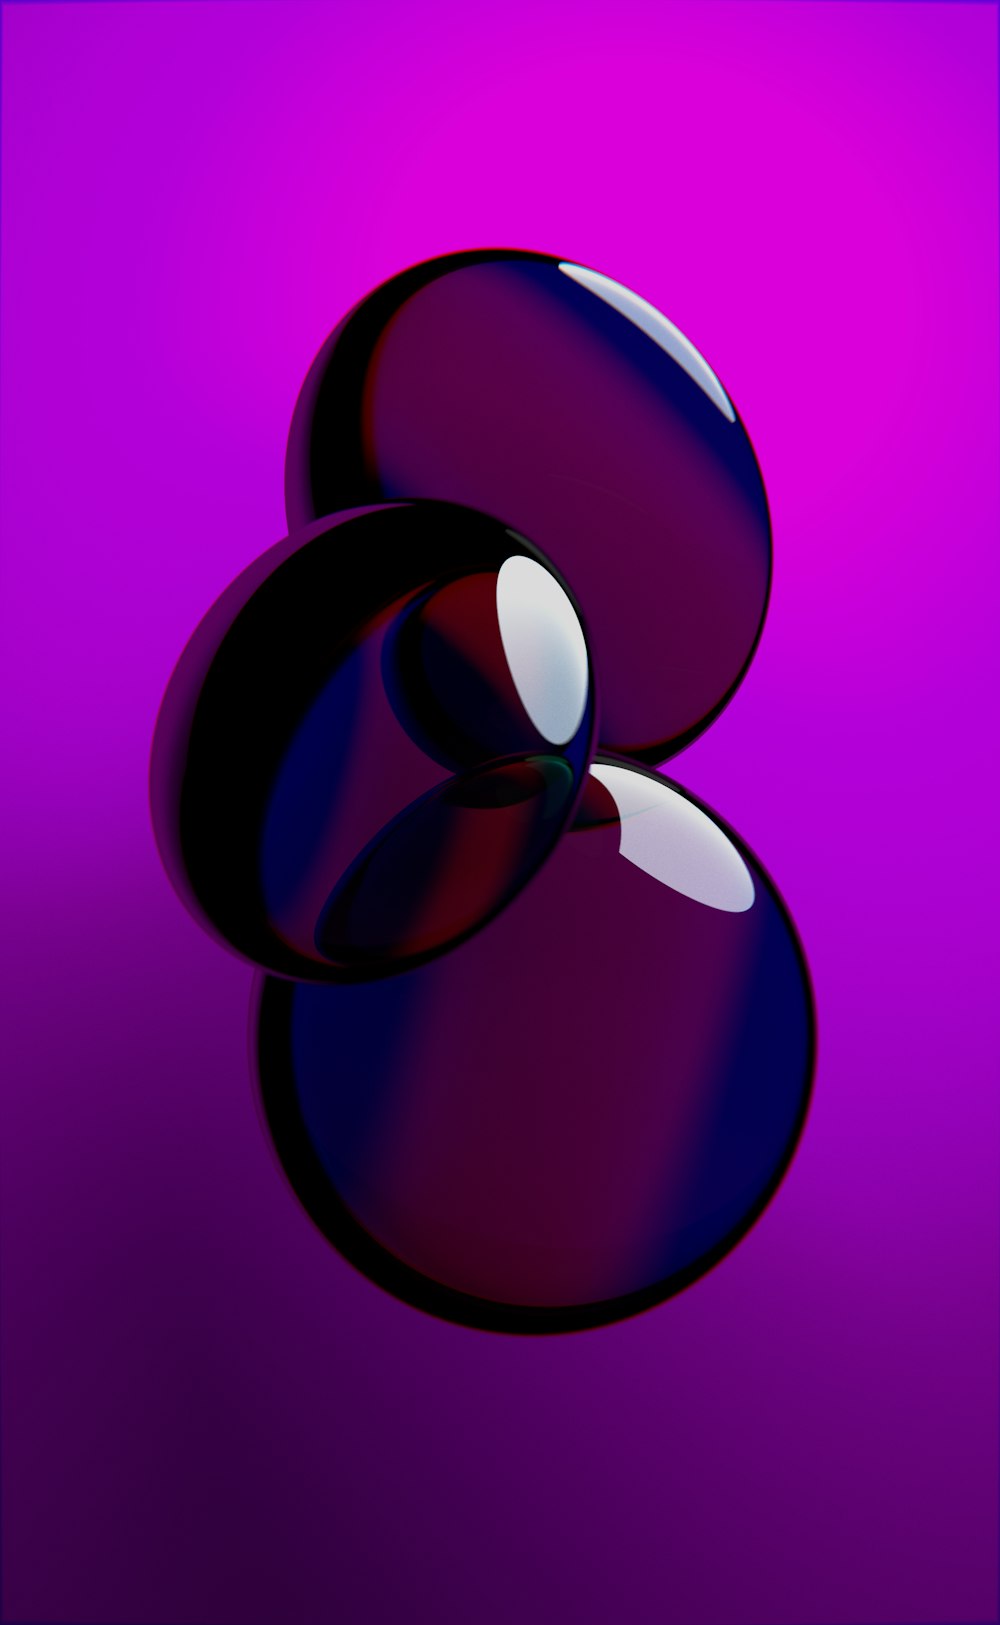 a picture of a purple and black object